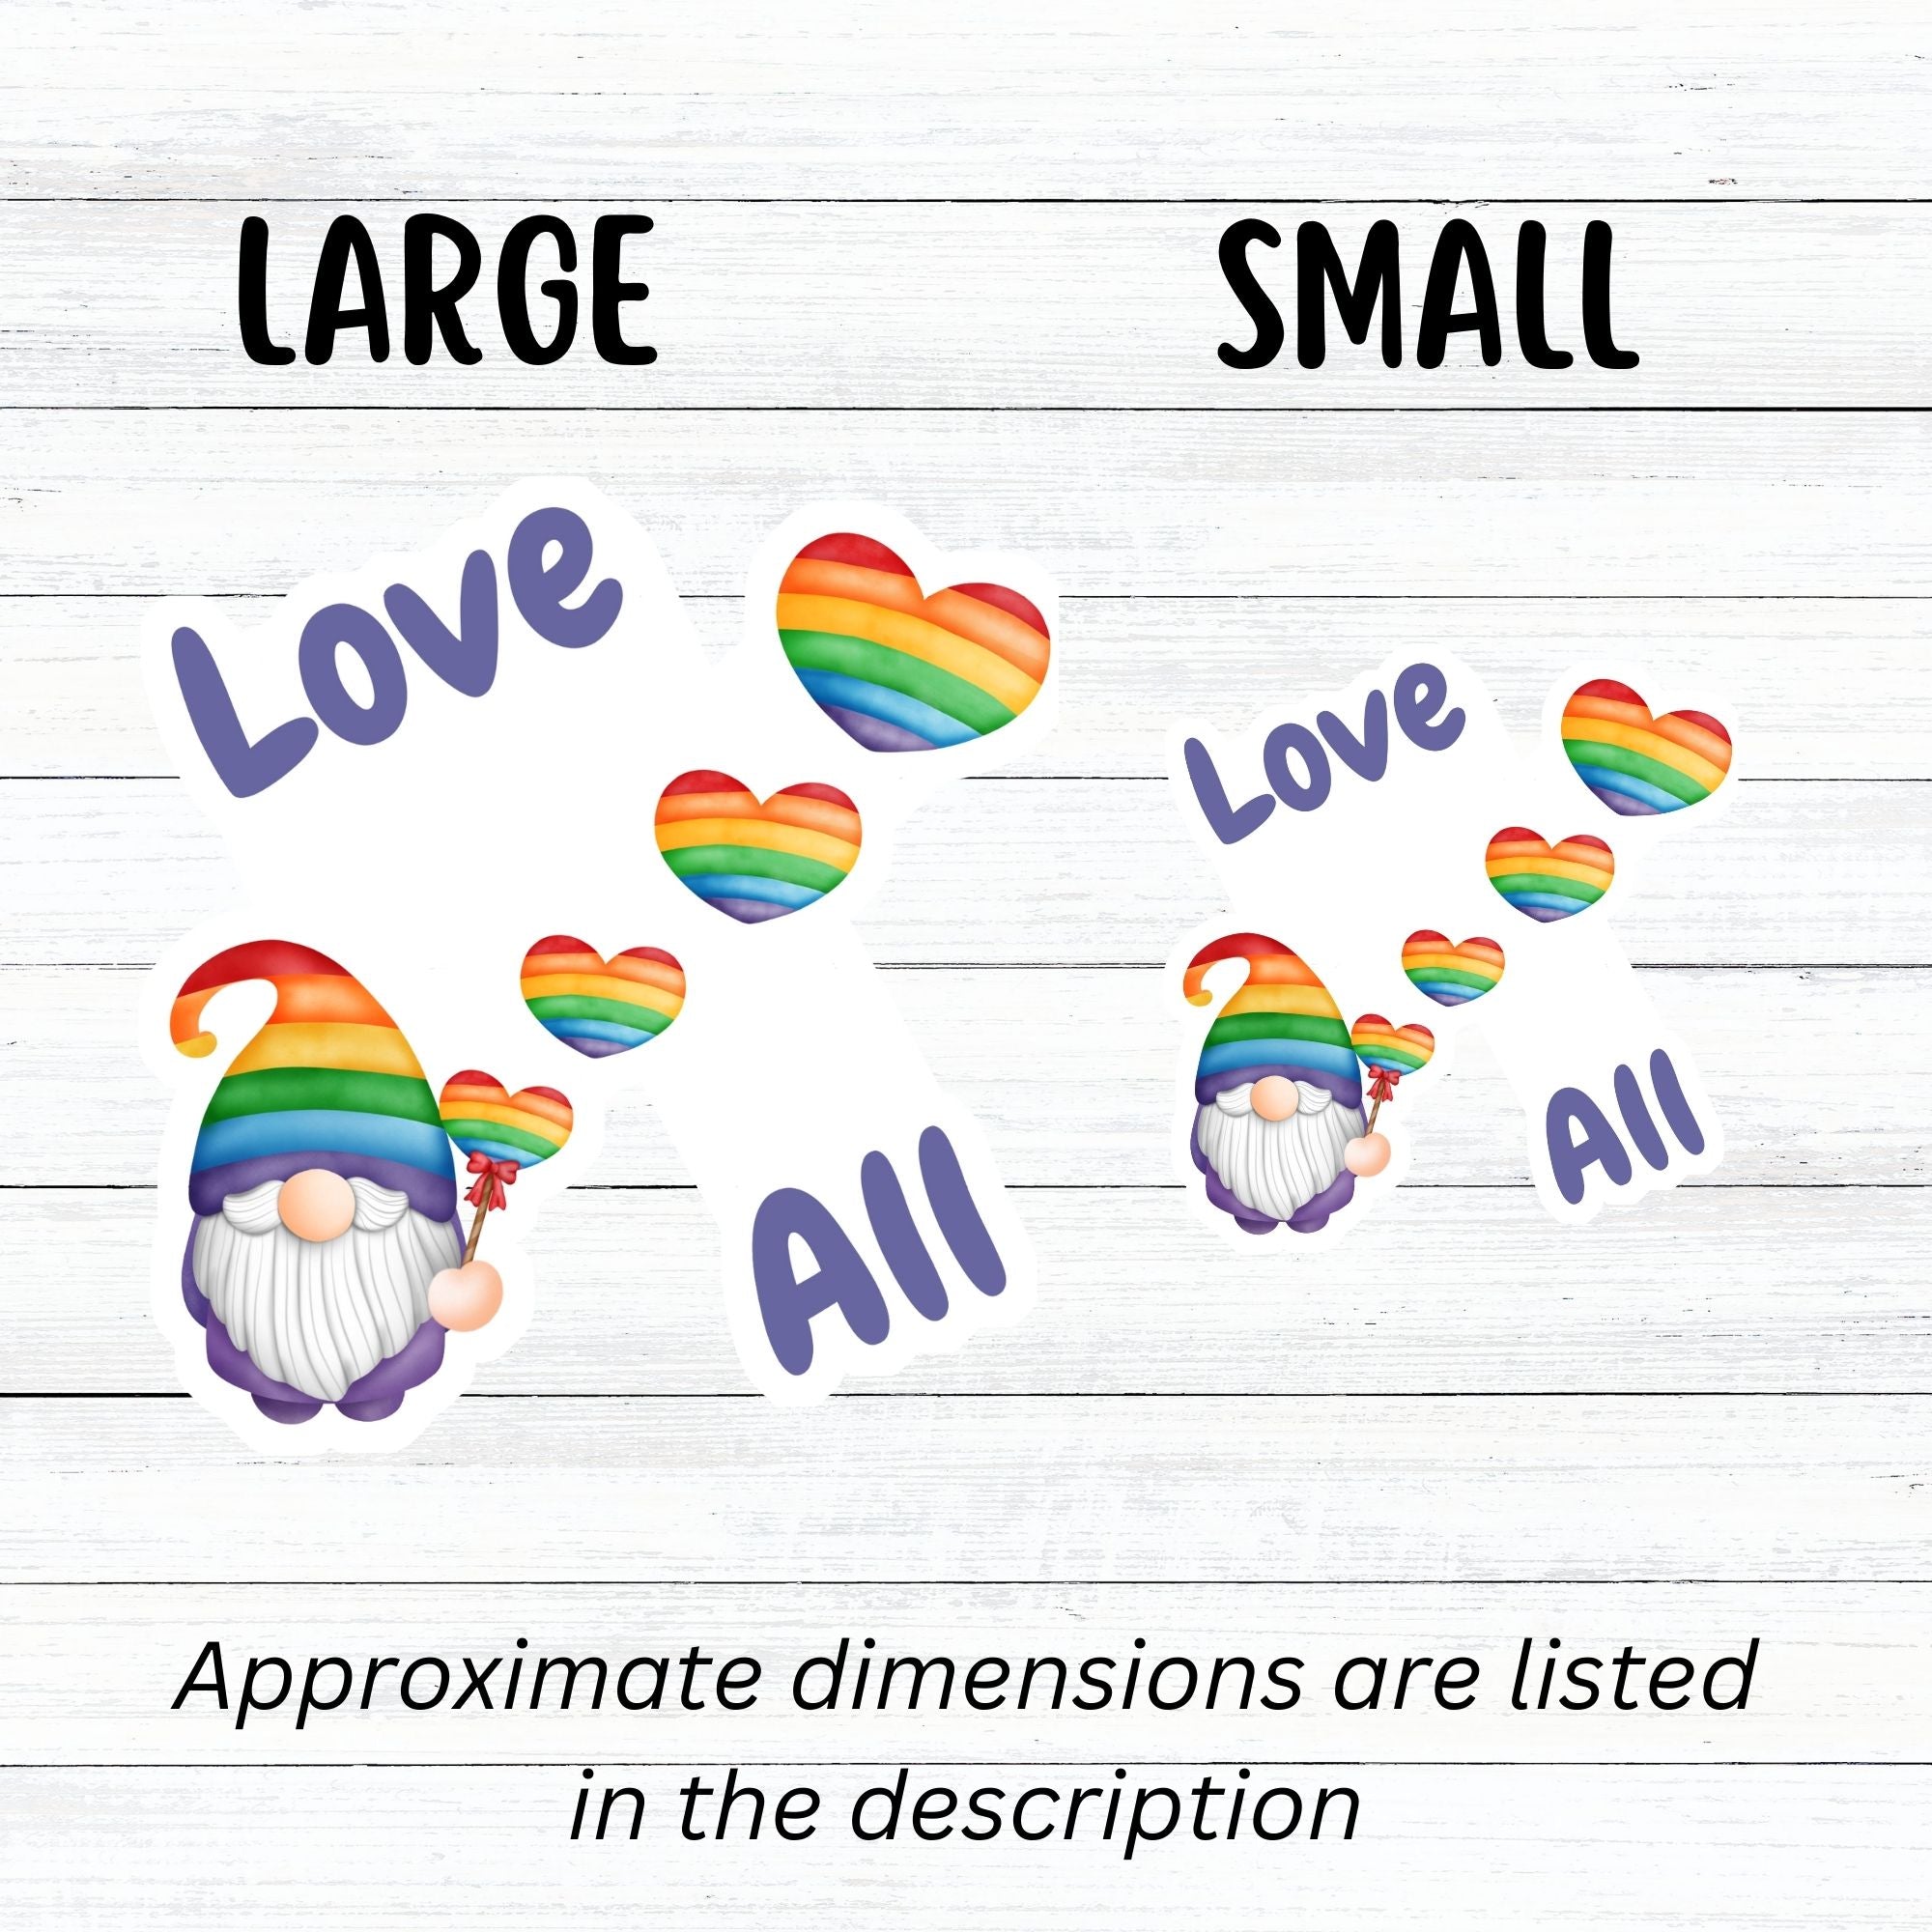 This gnome is showing his Pride! With the words "Love All", this individual die-cut sticker features a gnome with a rainbow hat and rainbow heart balloons. This image shows large and small Gnome Love All stickers next to each other.